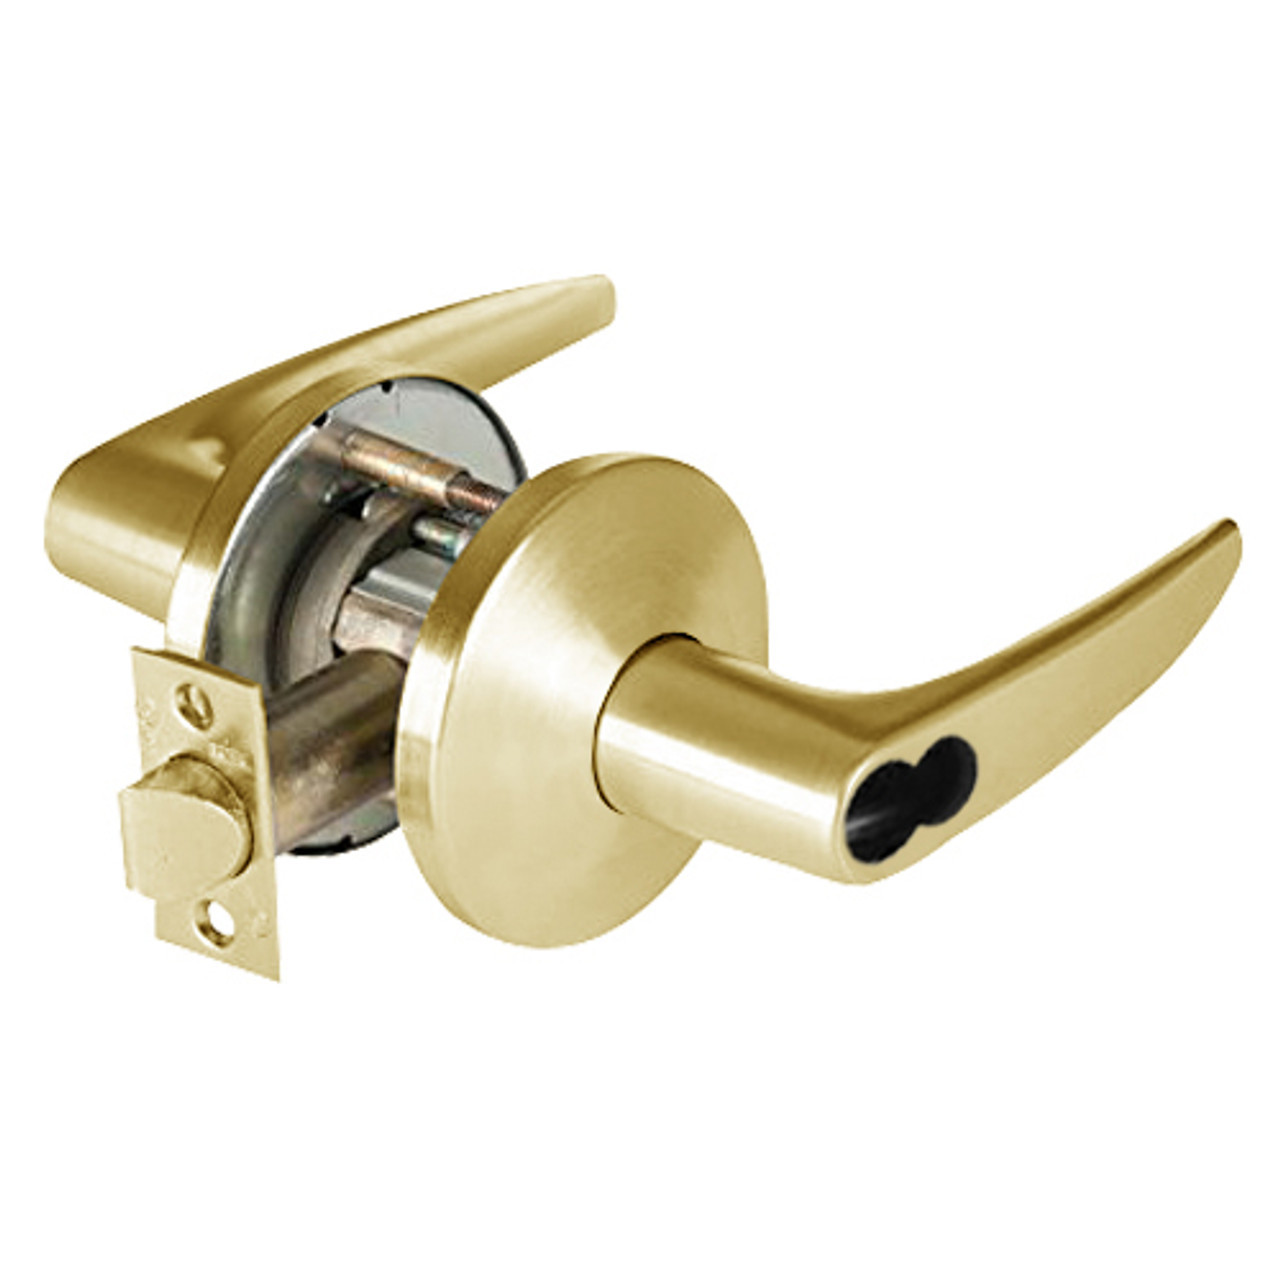 9K37A16LS3605LM Best 9K Series Dormitory or Storeroom Cylindrical Lever Locks with Curved without Return Lever Design Accept 7 Pin Best Core in Bright Brass